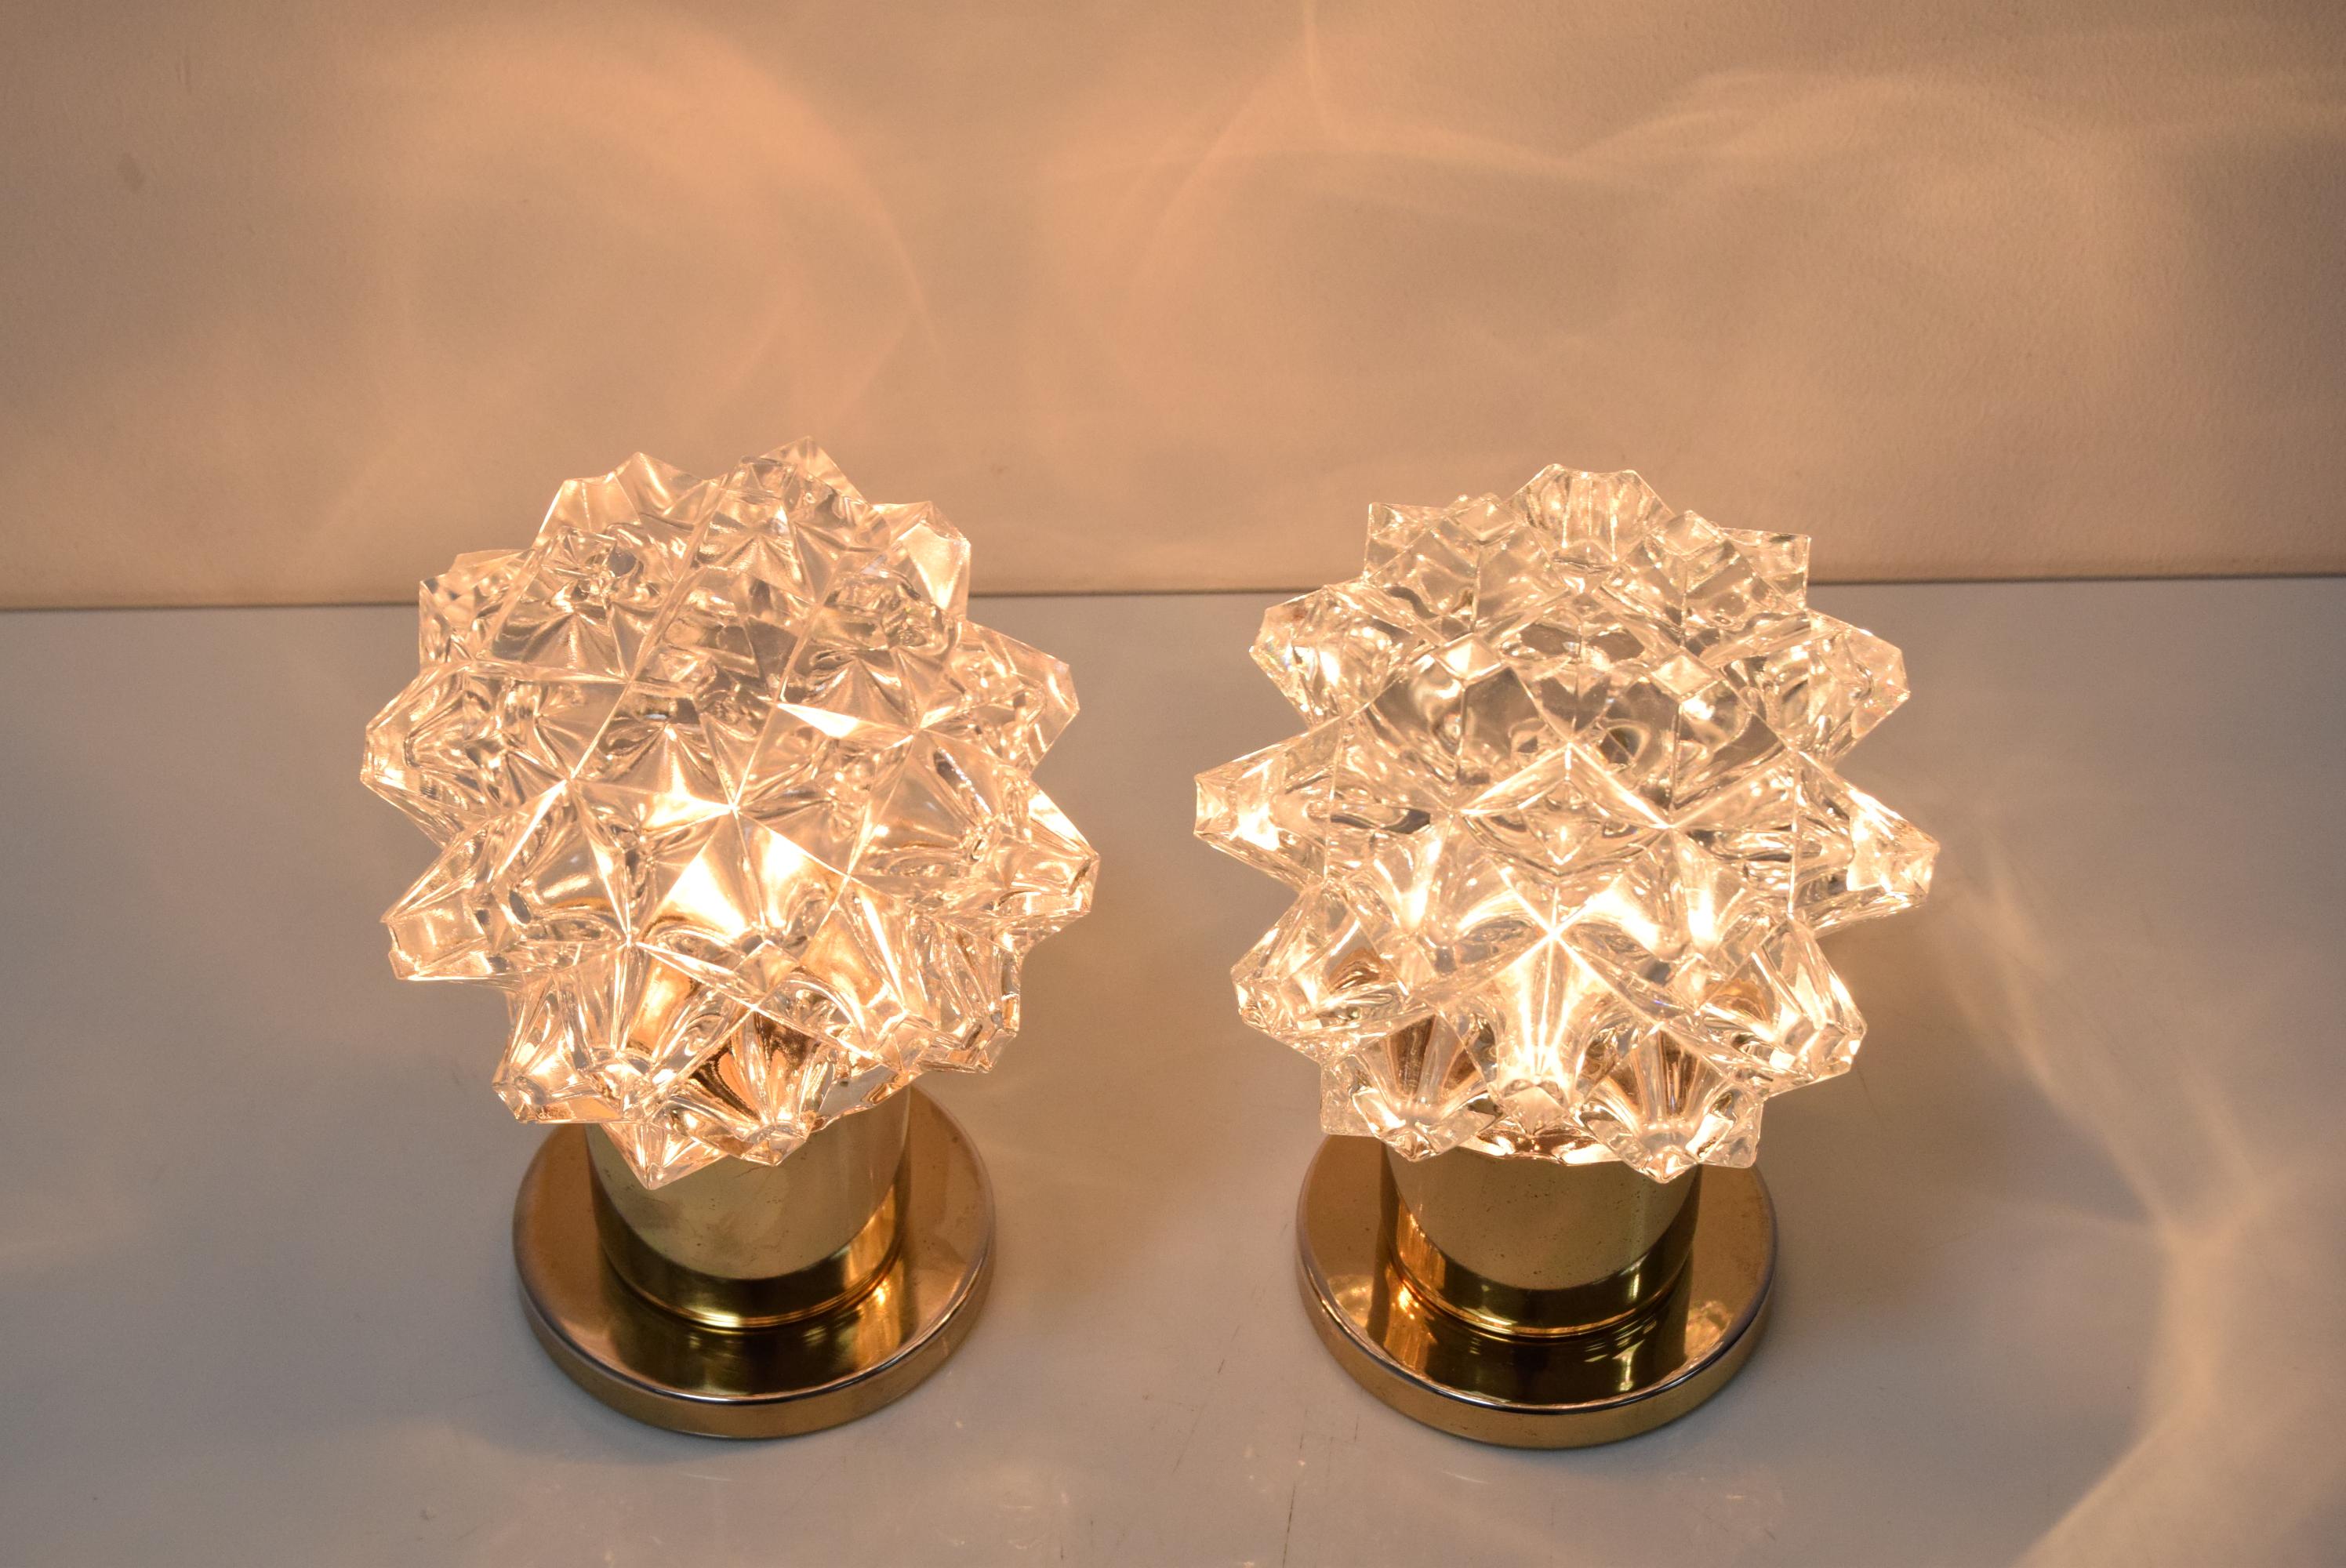 Pair of Design Table or Wall Lamps by Preciosa, Kamenicky Senov, 1960's. For Sale 4